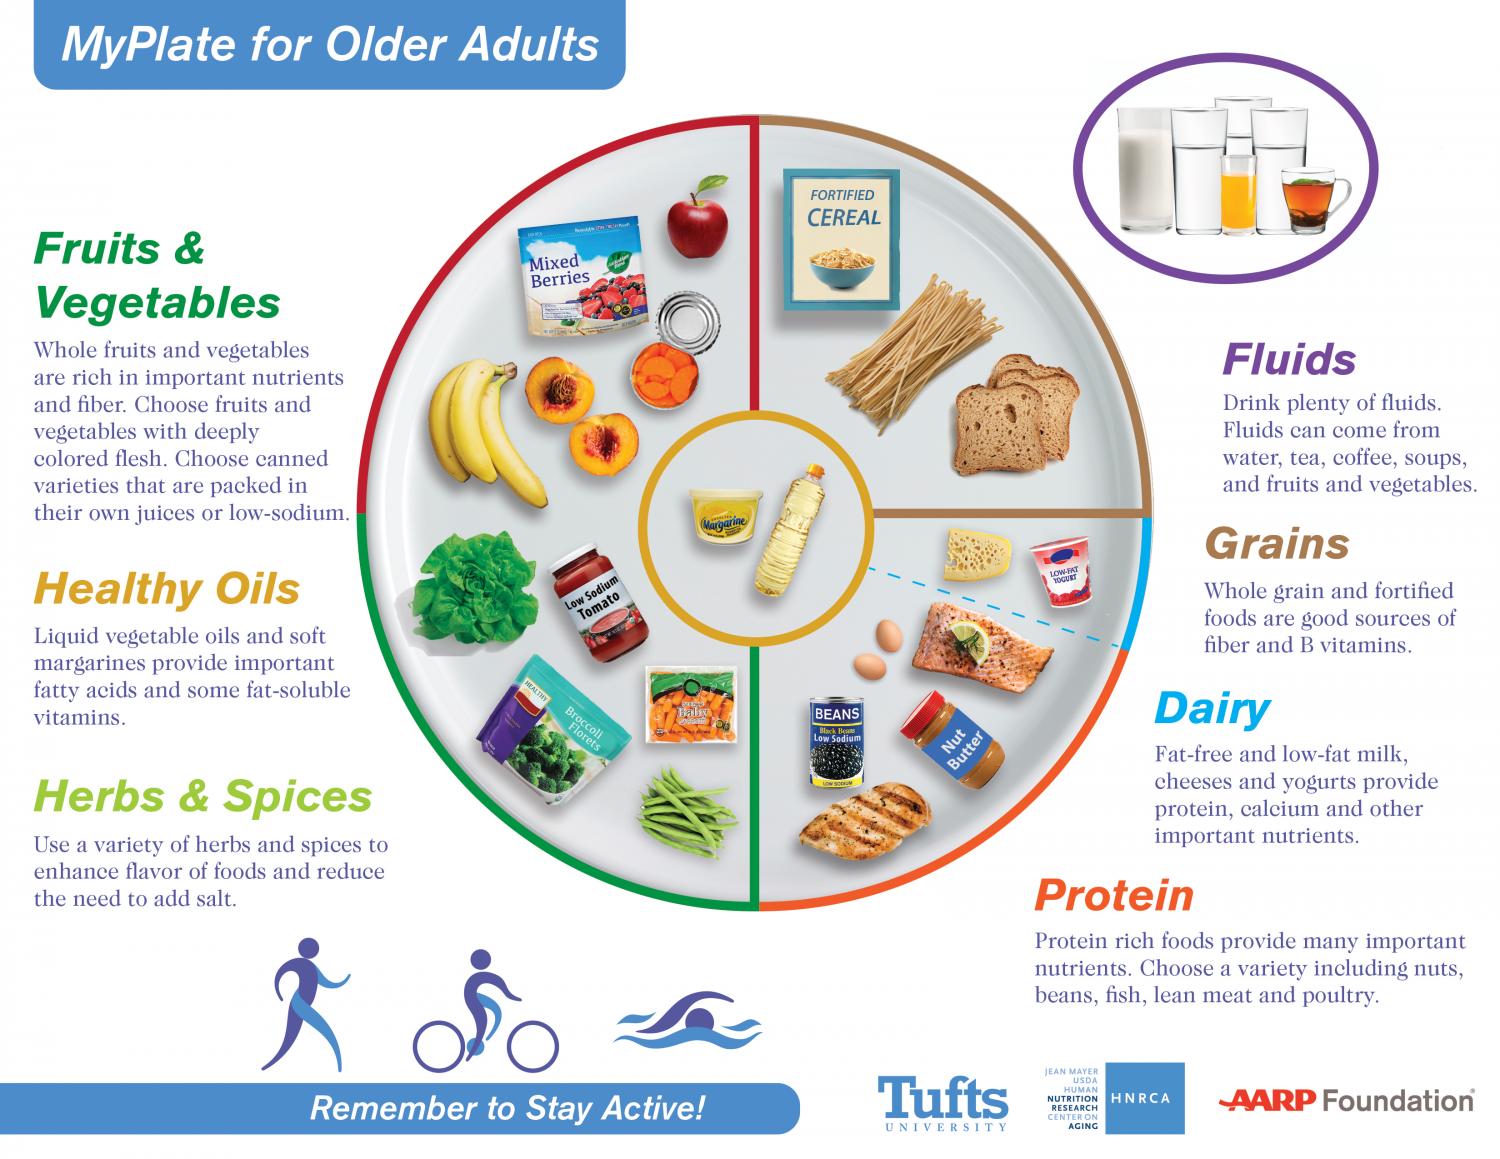 nutrition-scientists-provide-updated-myplate-for-older-adults